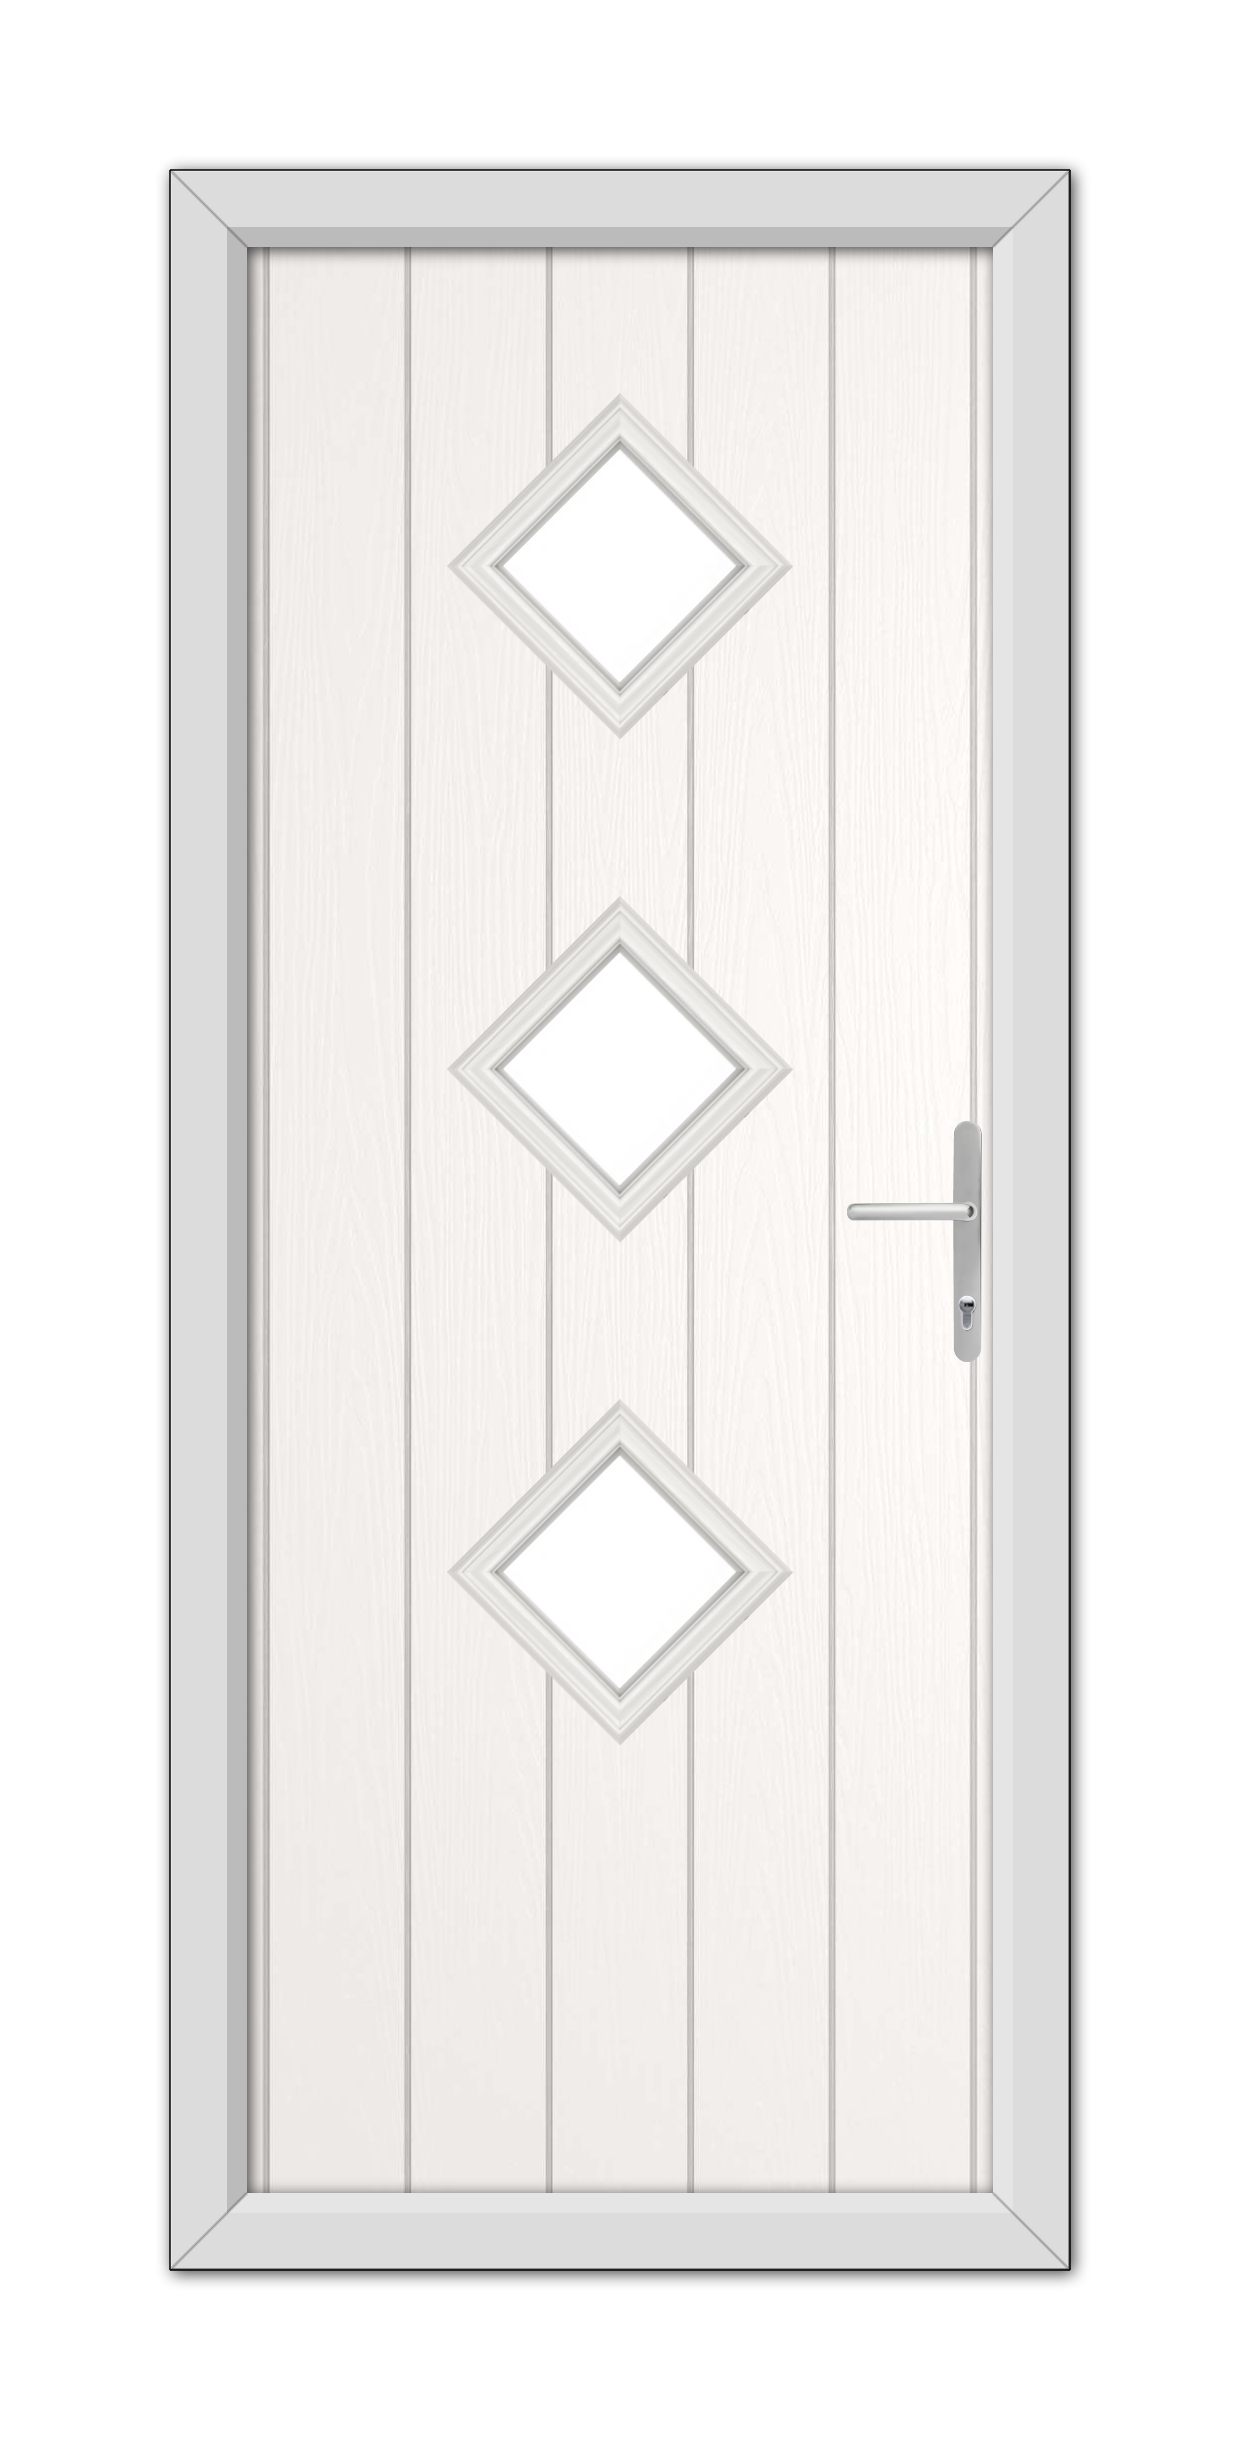 A White Richmond Composite Door 48mm Timber Core with three diamond-shaped windows and a modern handle, set within a simple frame.